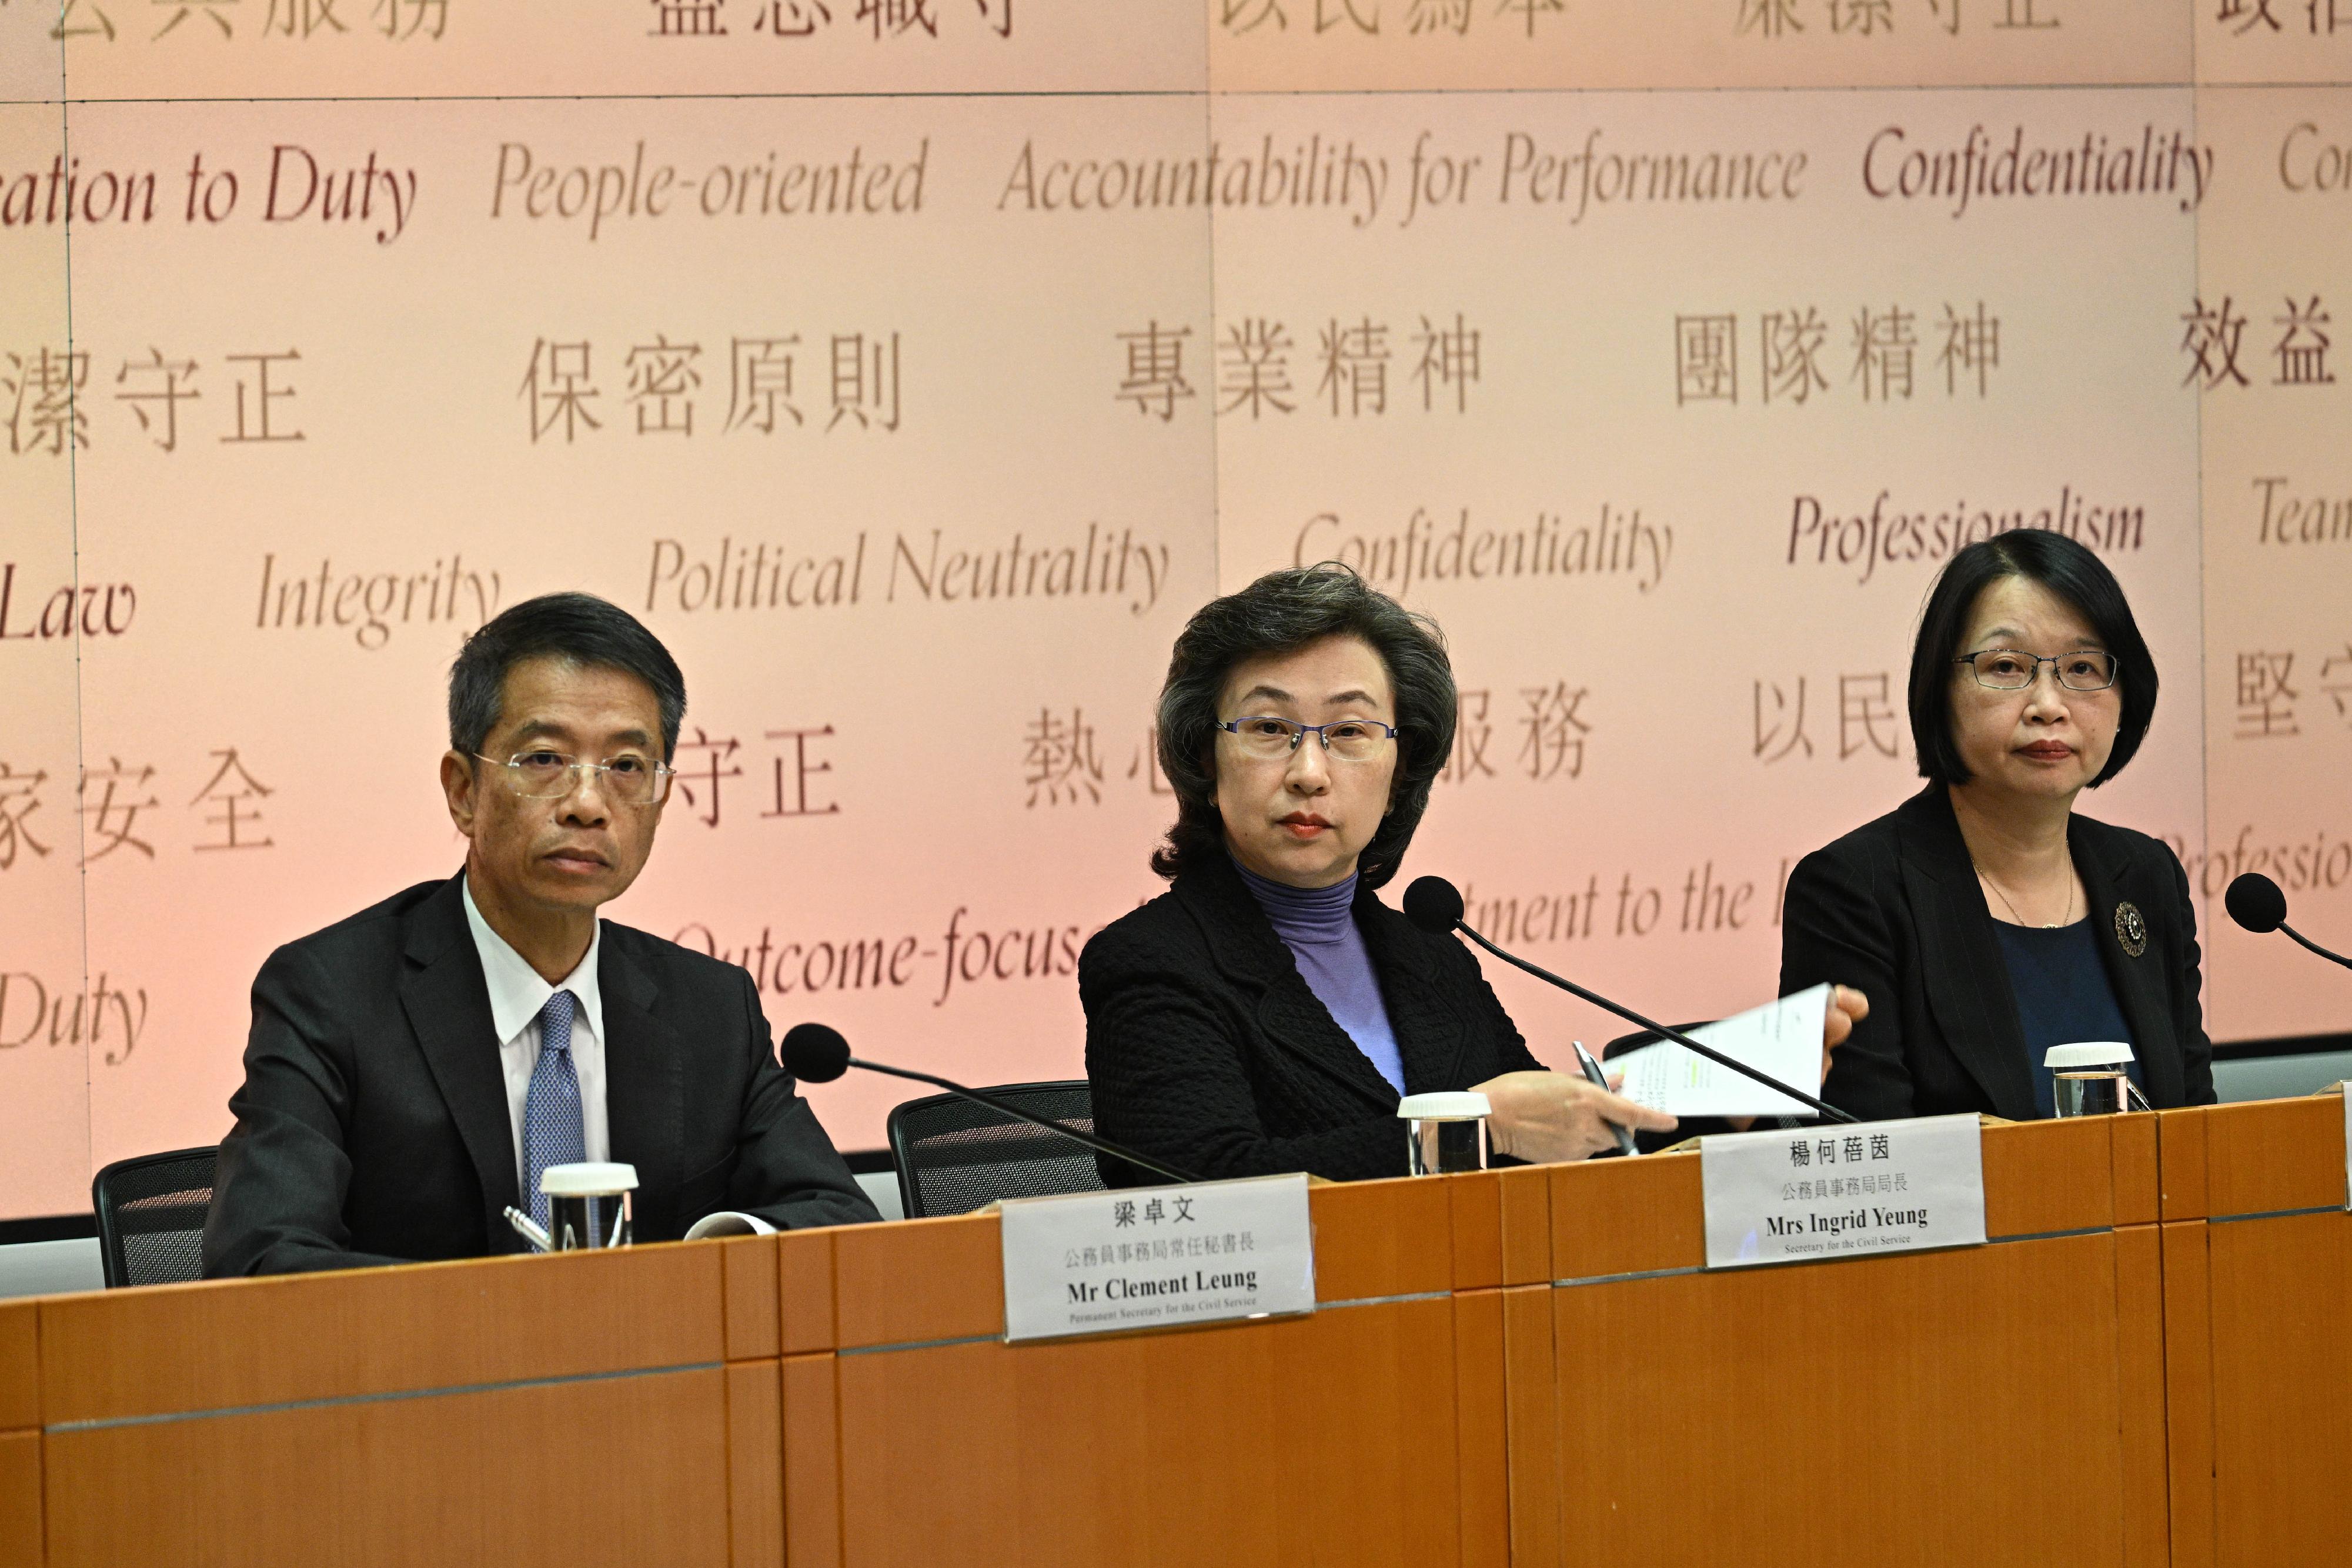 The Secretary for the Civil Service, Mrs Ingrid Yeung, held a press conference today (December 13) on the updated Civil Service Code for consultation. Photo shows (from left) the Permanent Secretary for the Civil Service, Mr Clement Leung; Mrs Yeung; and Deputy Secretary for the Civil Service Mrs Angelina Cheung at the press conference.